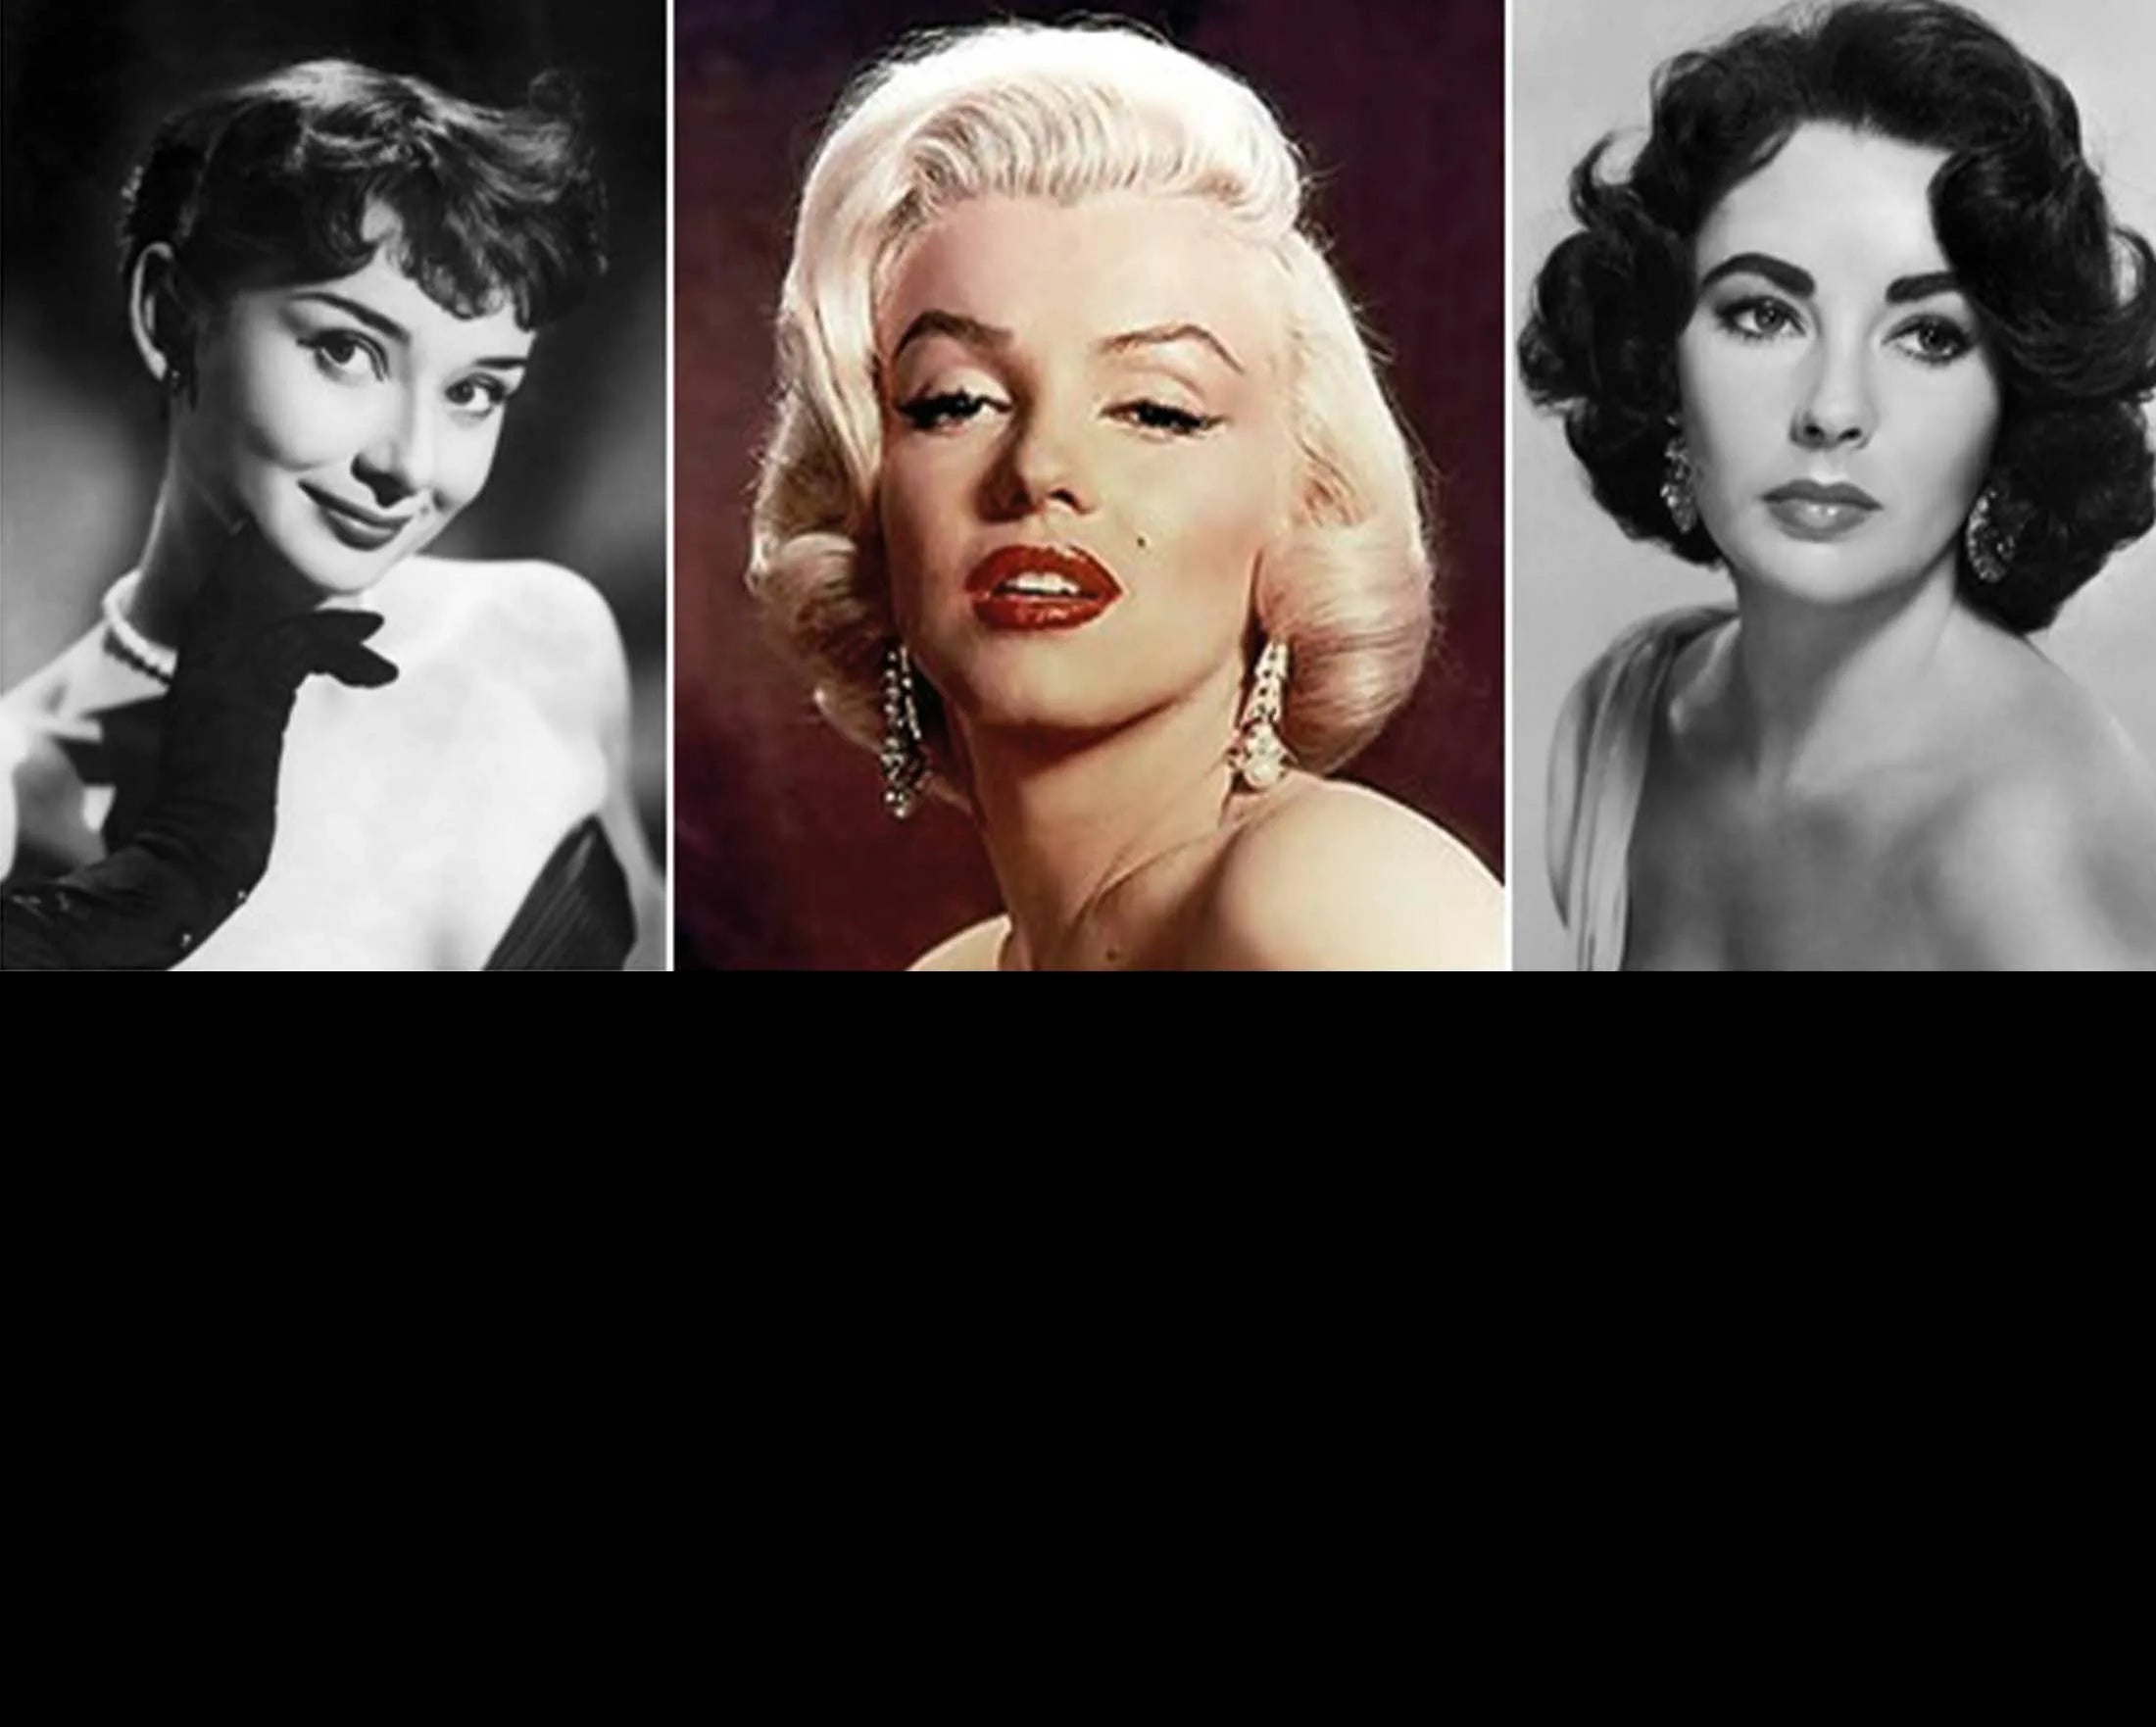 Audrey Flicks and Marilyn Lips: A classic make-up tutorial